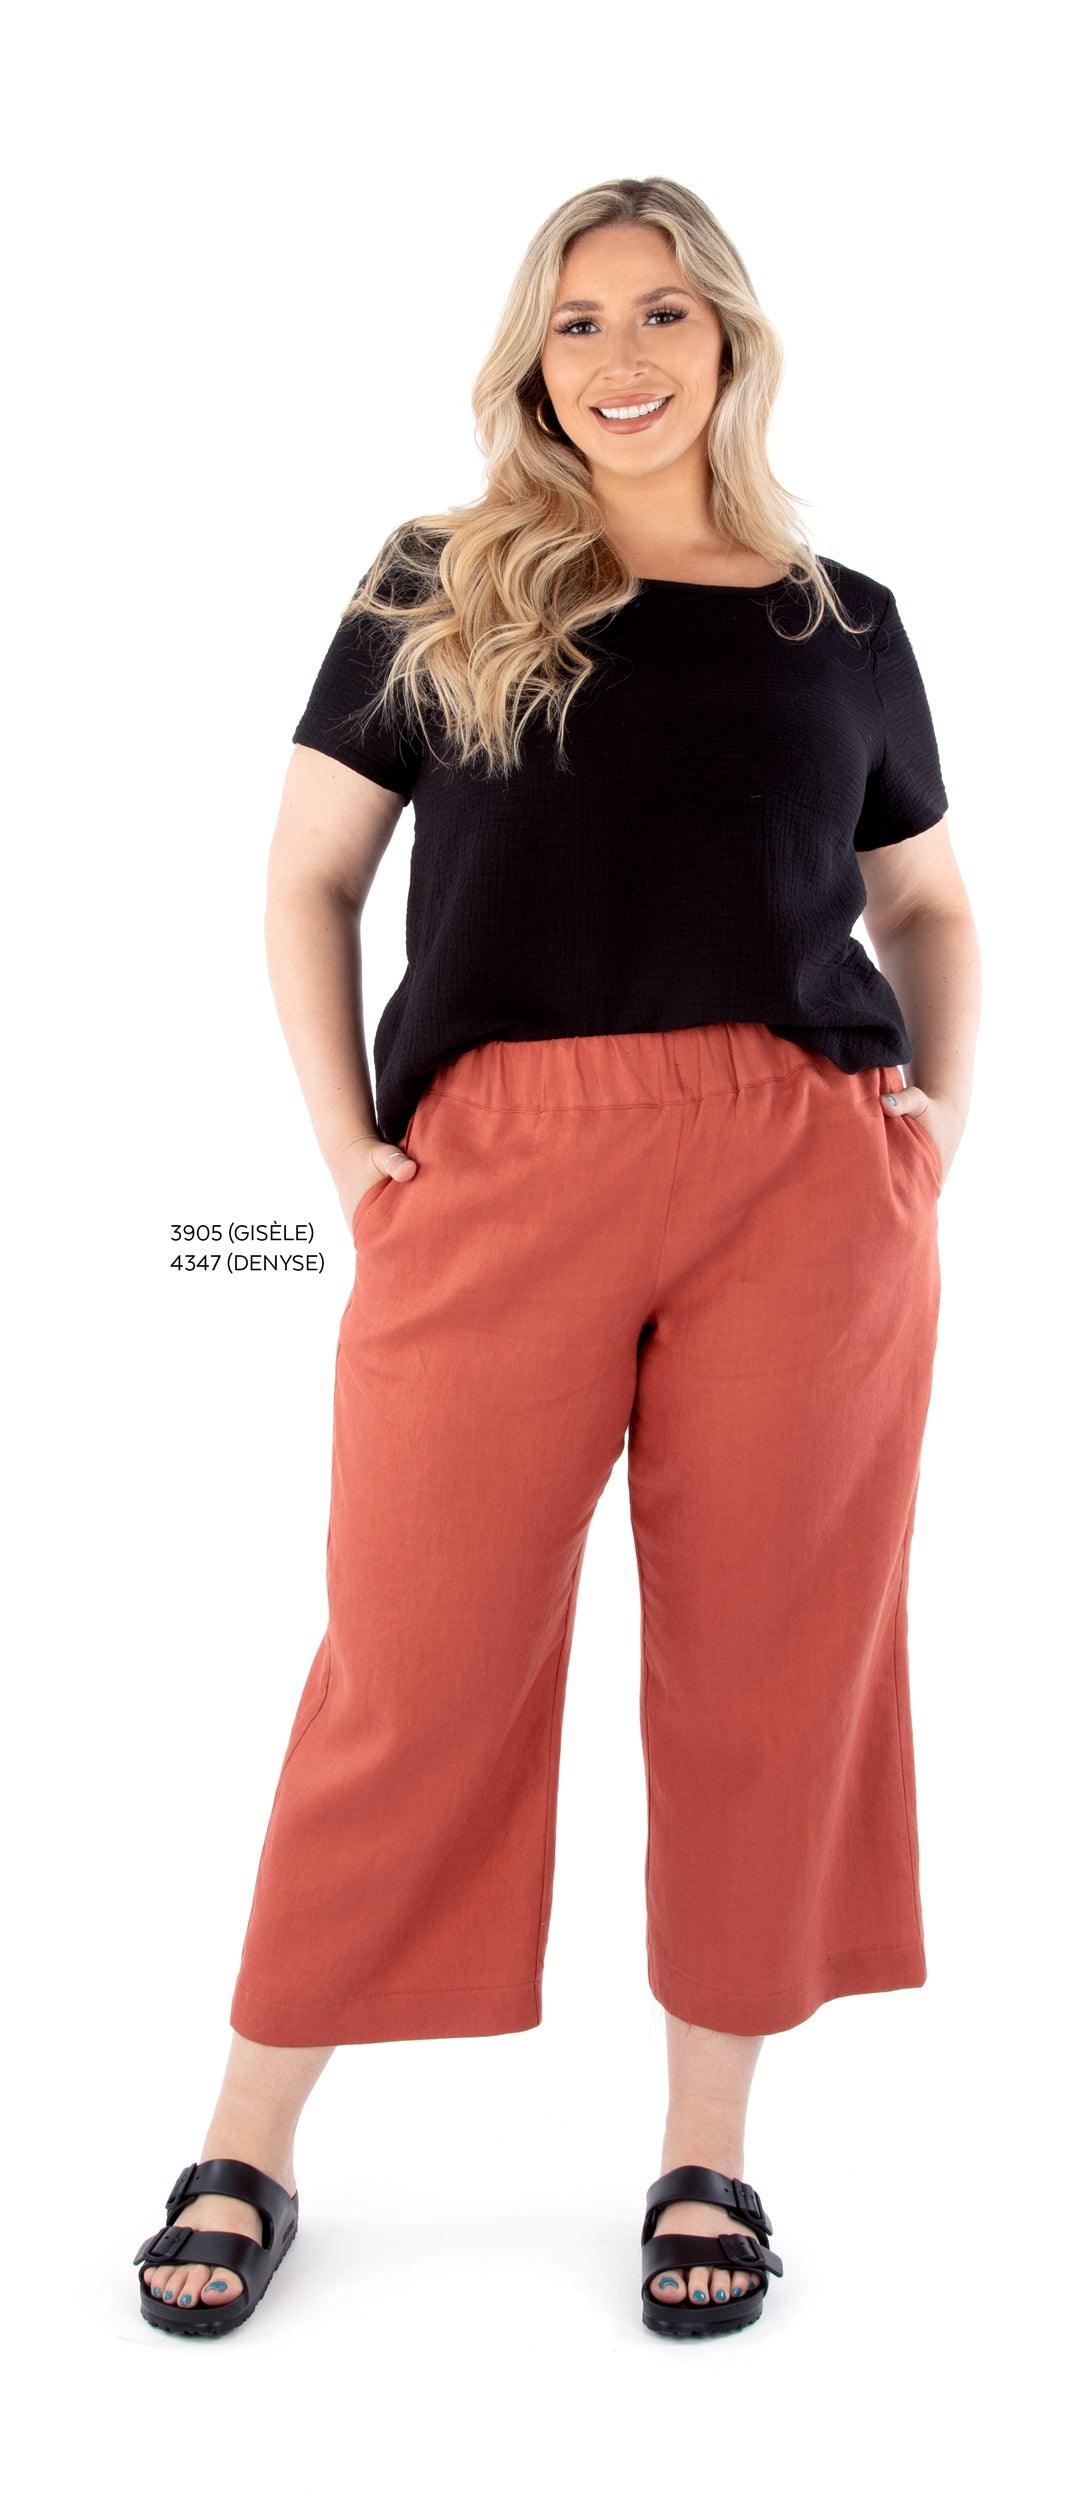 Pull-on Pants : Plus Size Clothing